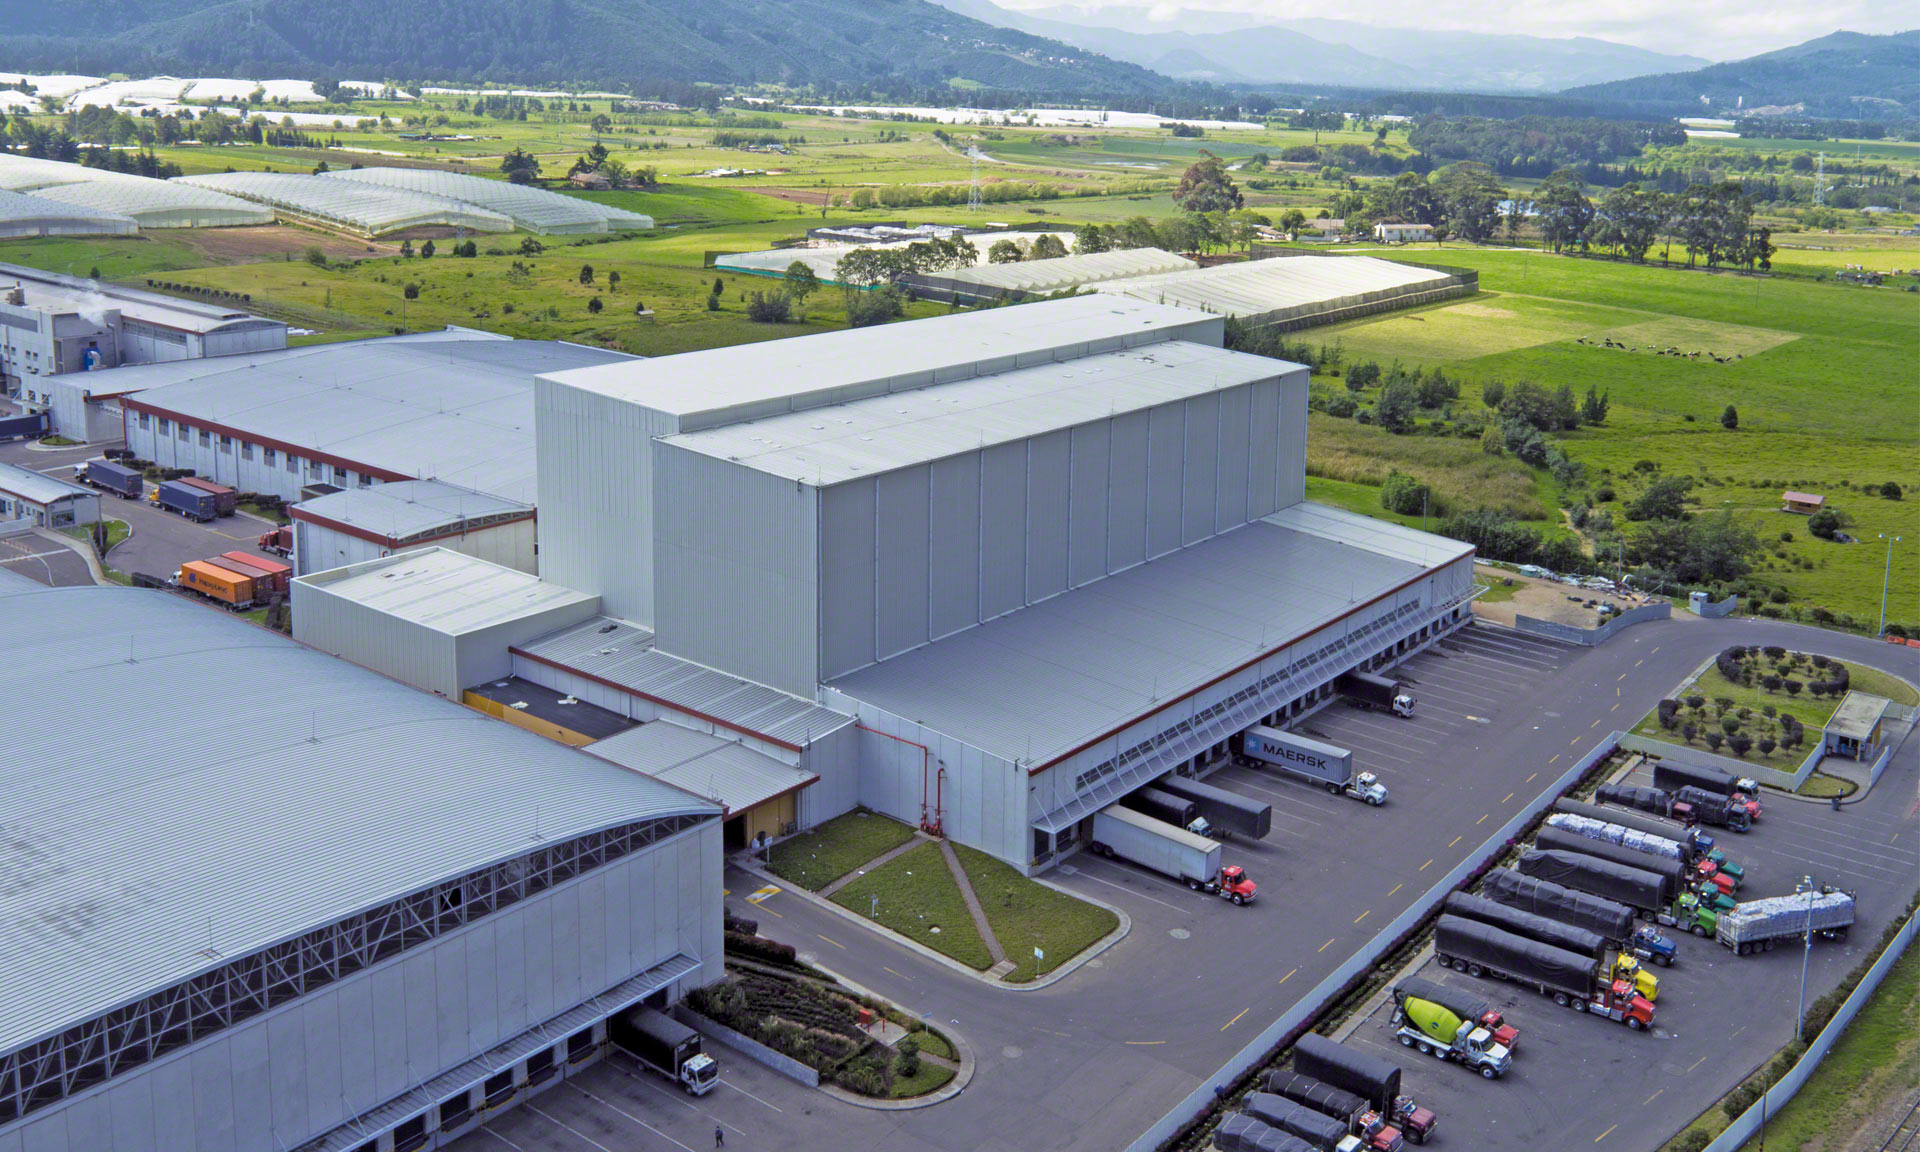 Grupo Familia has a 35 m high automated clad-rack warehouse capable of handling around 17,000 pallets